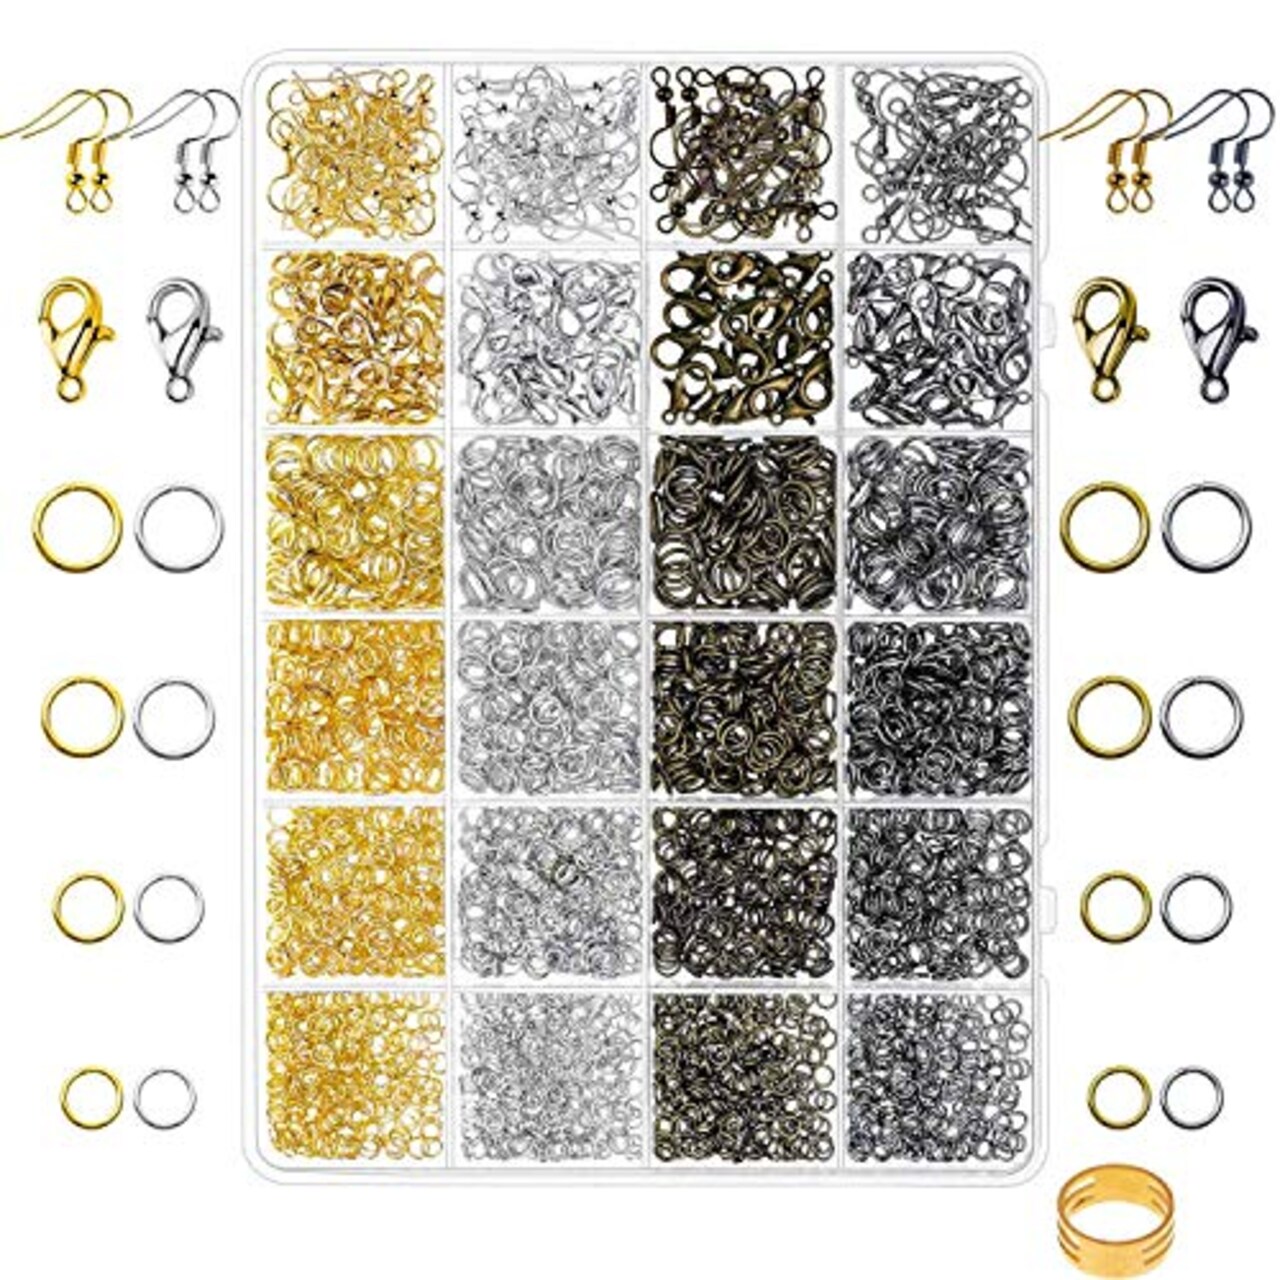 Paxcoo 3200Pcs Jewelry Necklace Repair Kit with Jump Rings, Clasps